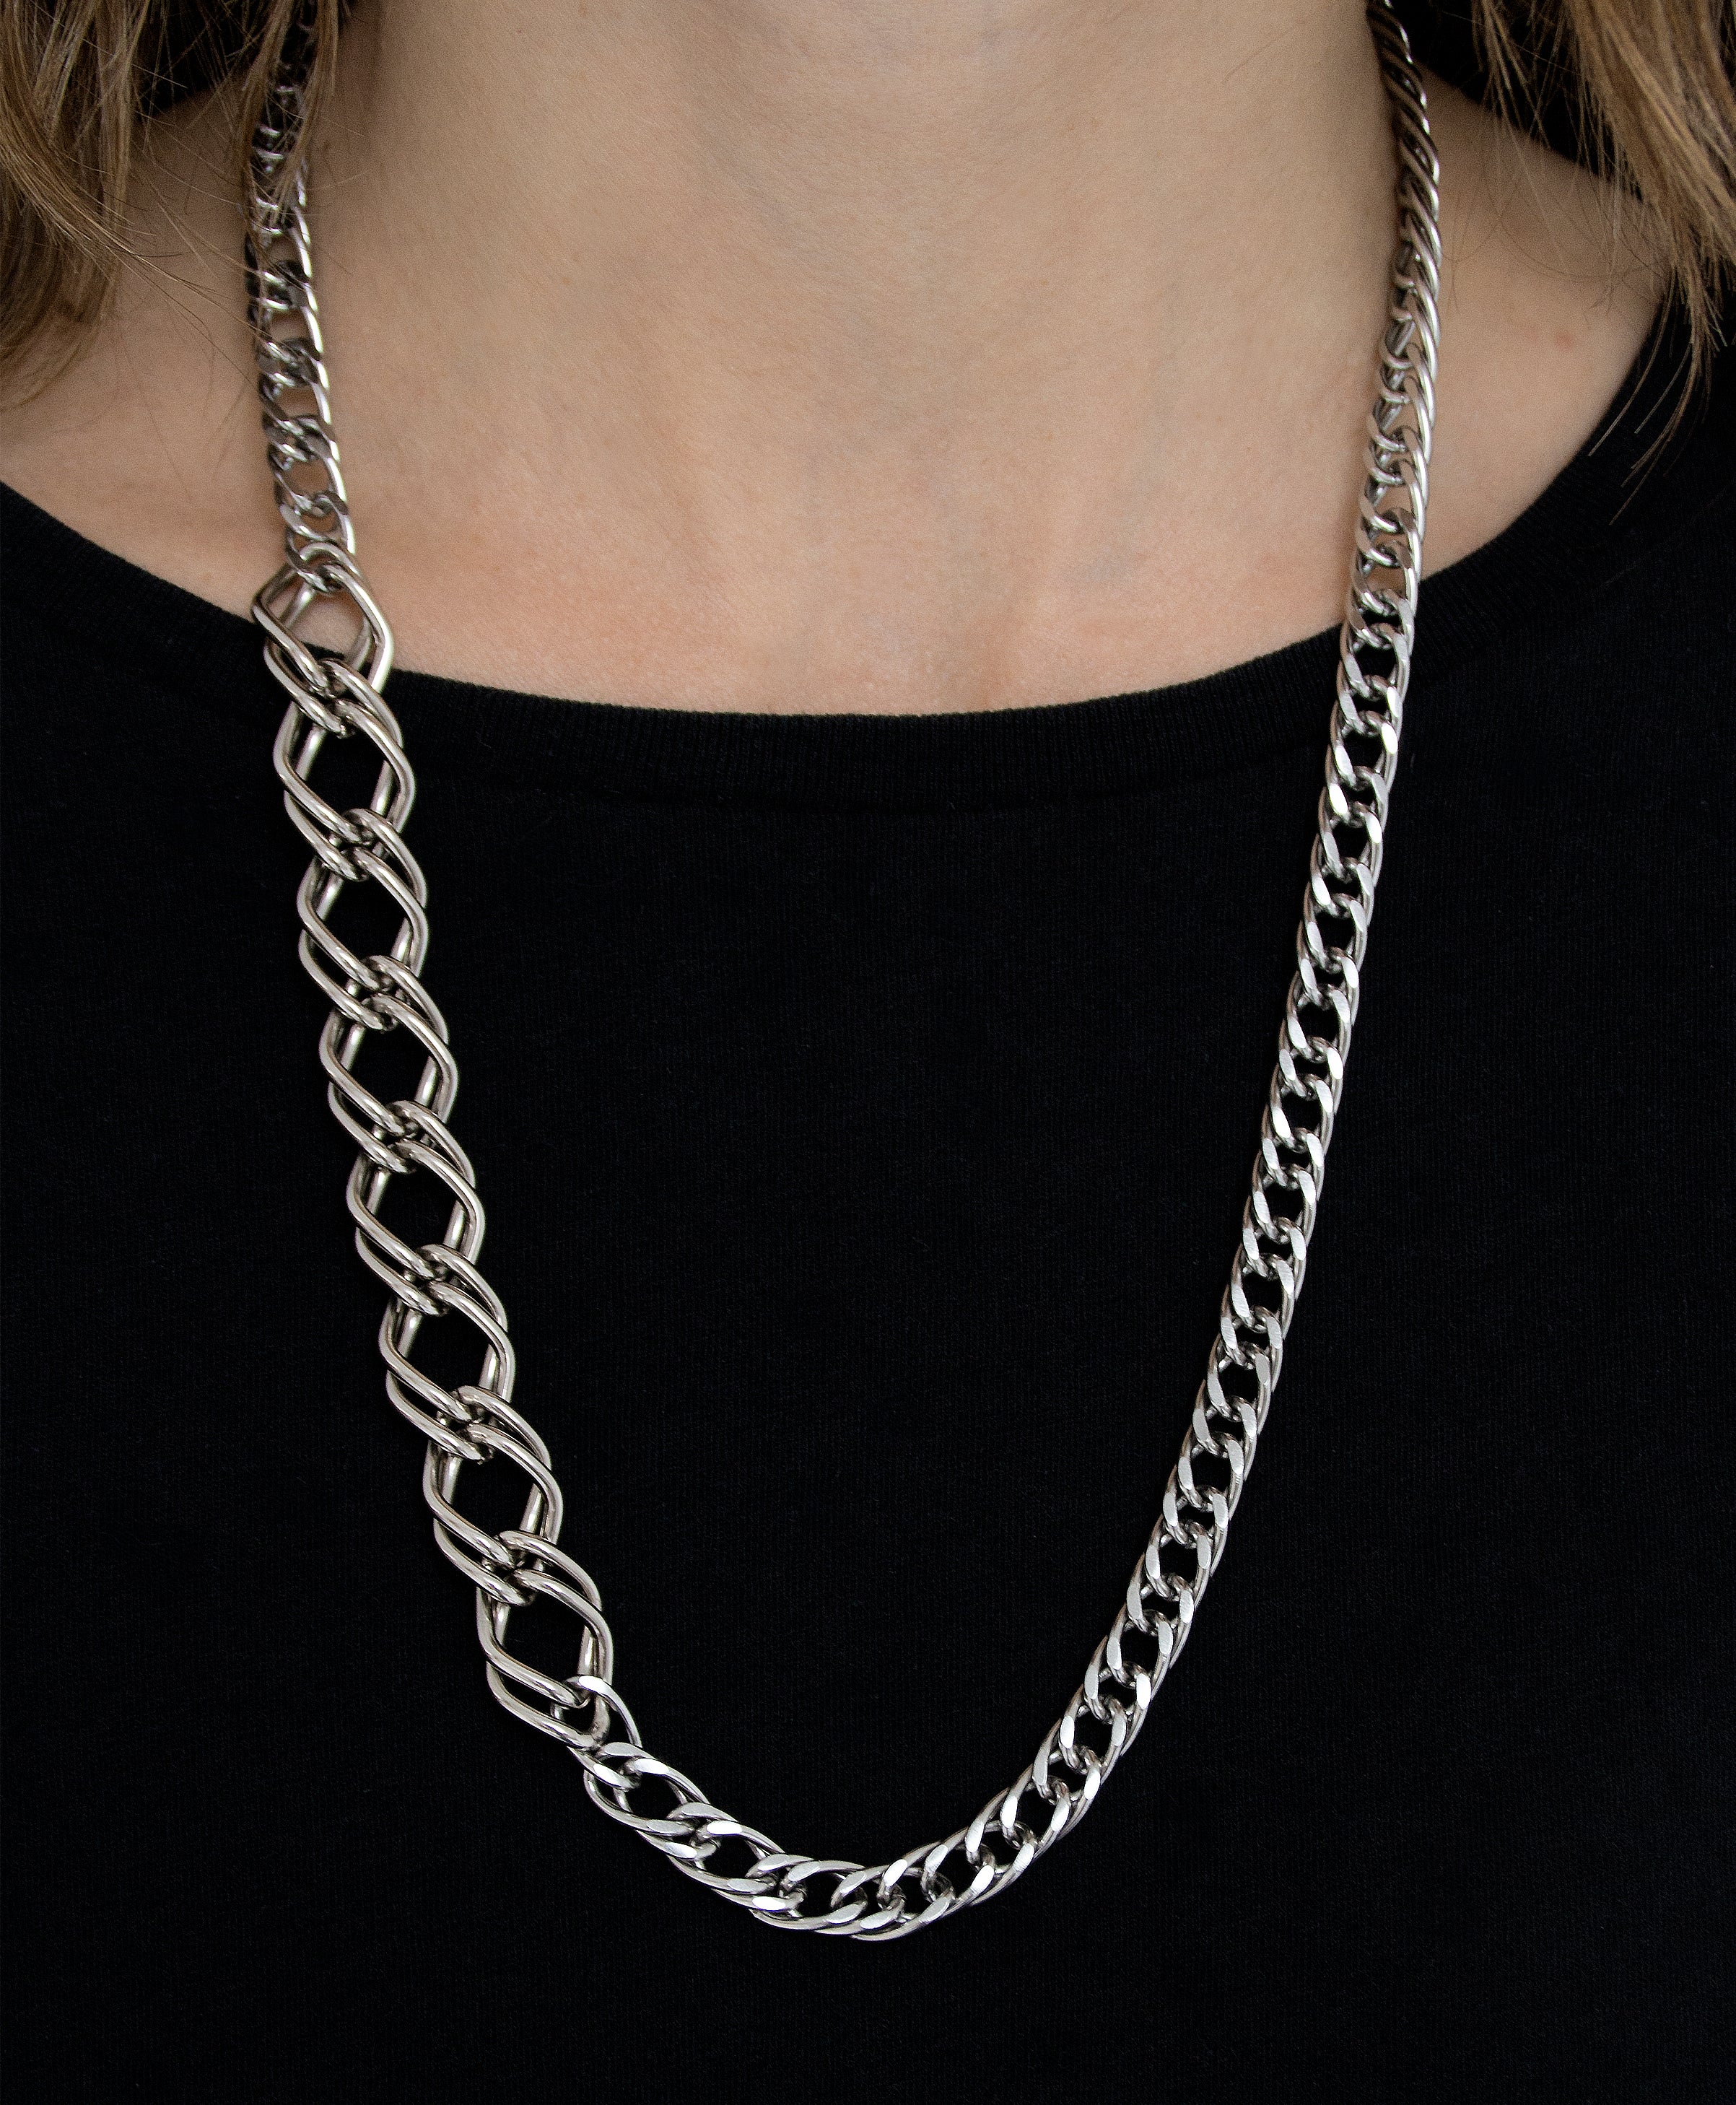 llayers-mens-women-jewelry-silver-stainlesssteel-choker-chain-necklace-unchained-007-Brooklyn-New-York-4